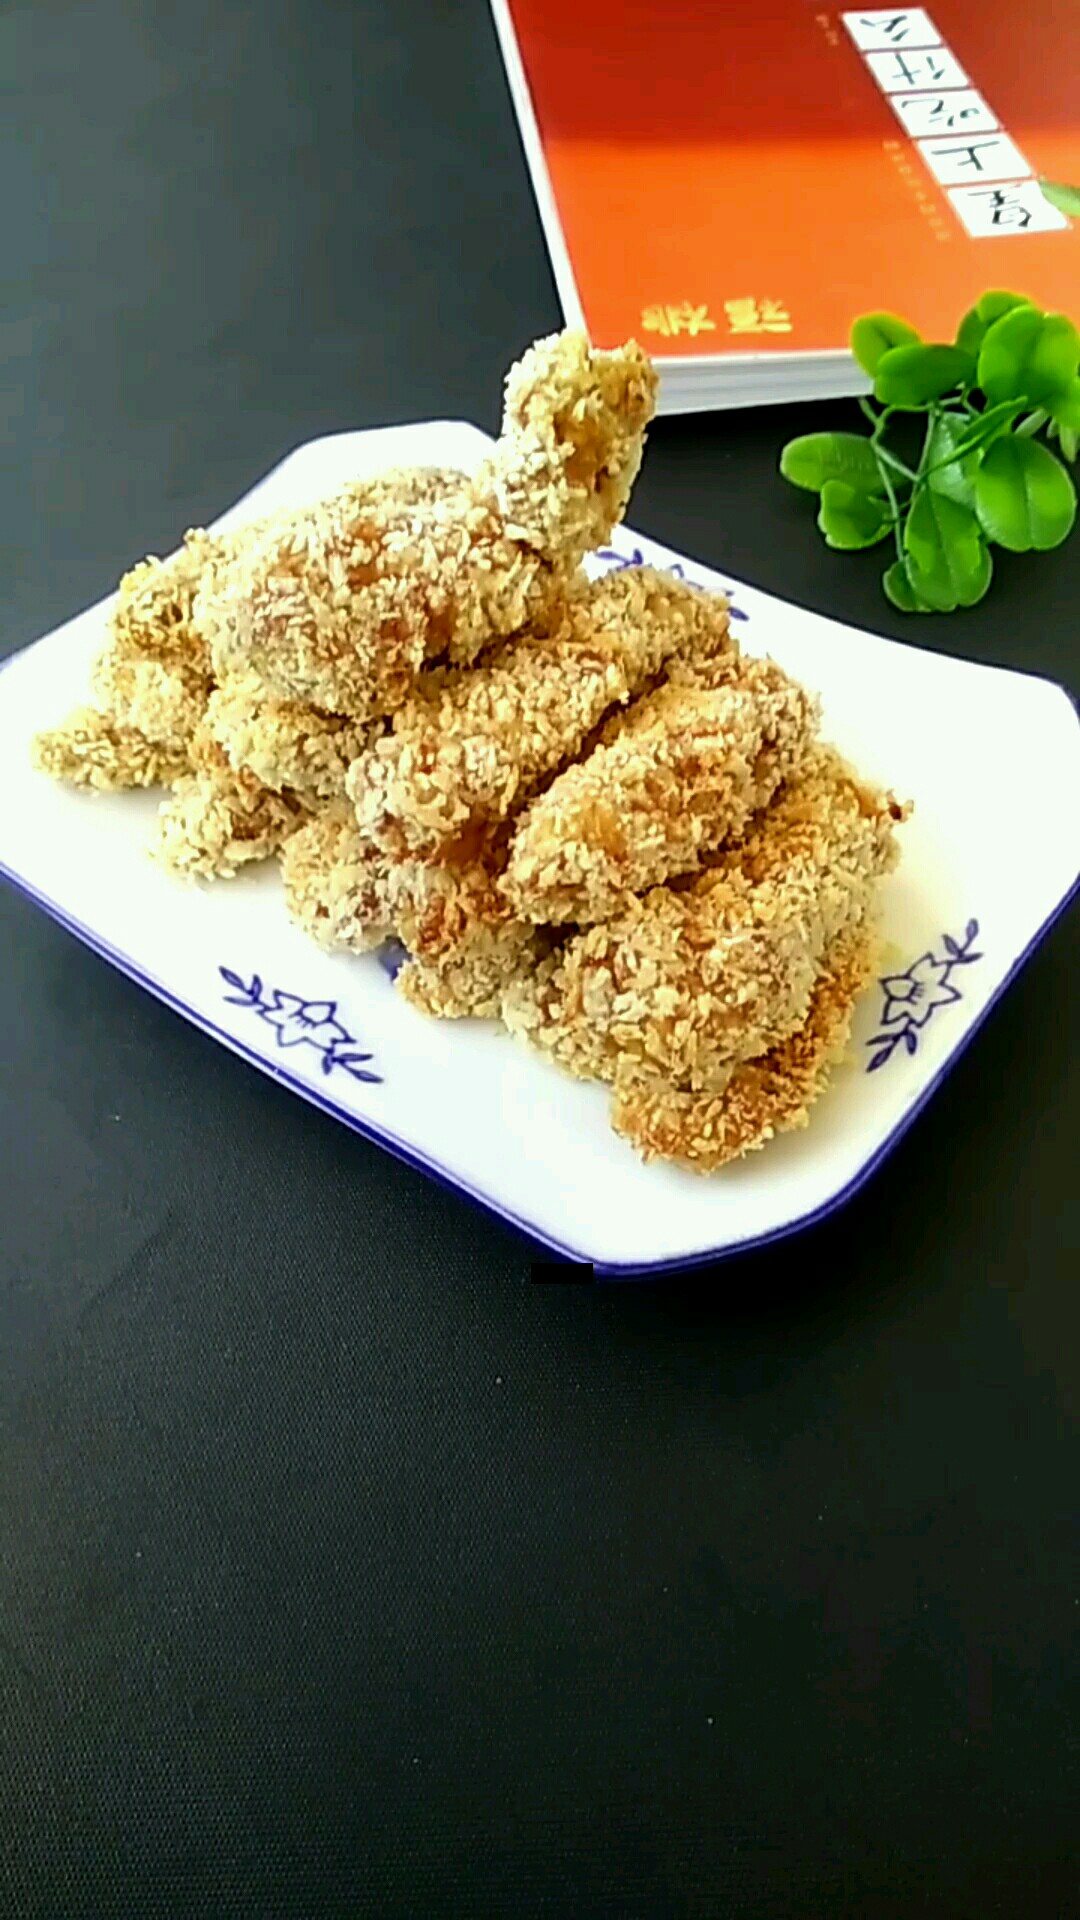 The Fragrant Fried Chicken Fillet without A Drop of Oil recipe